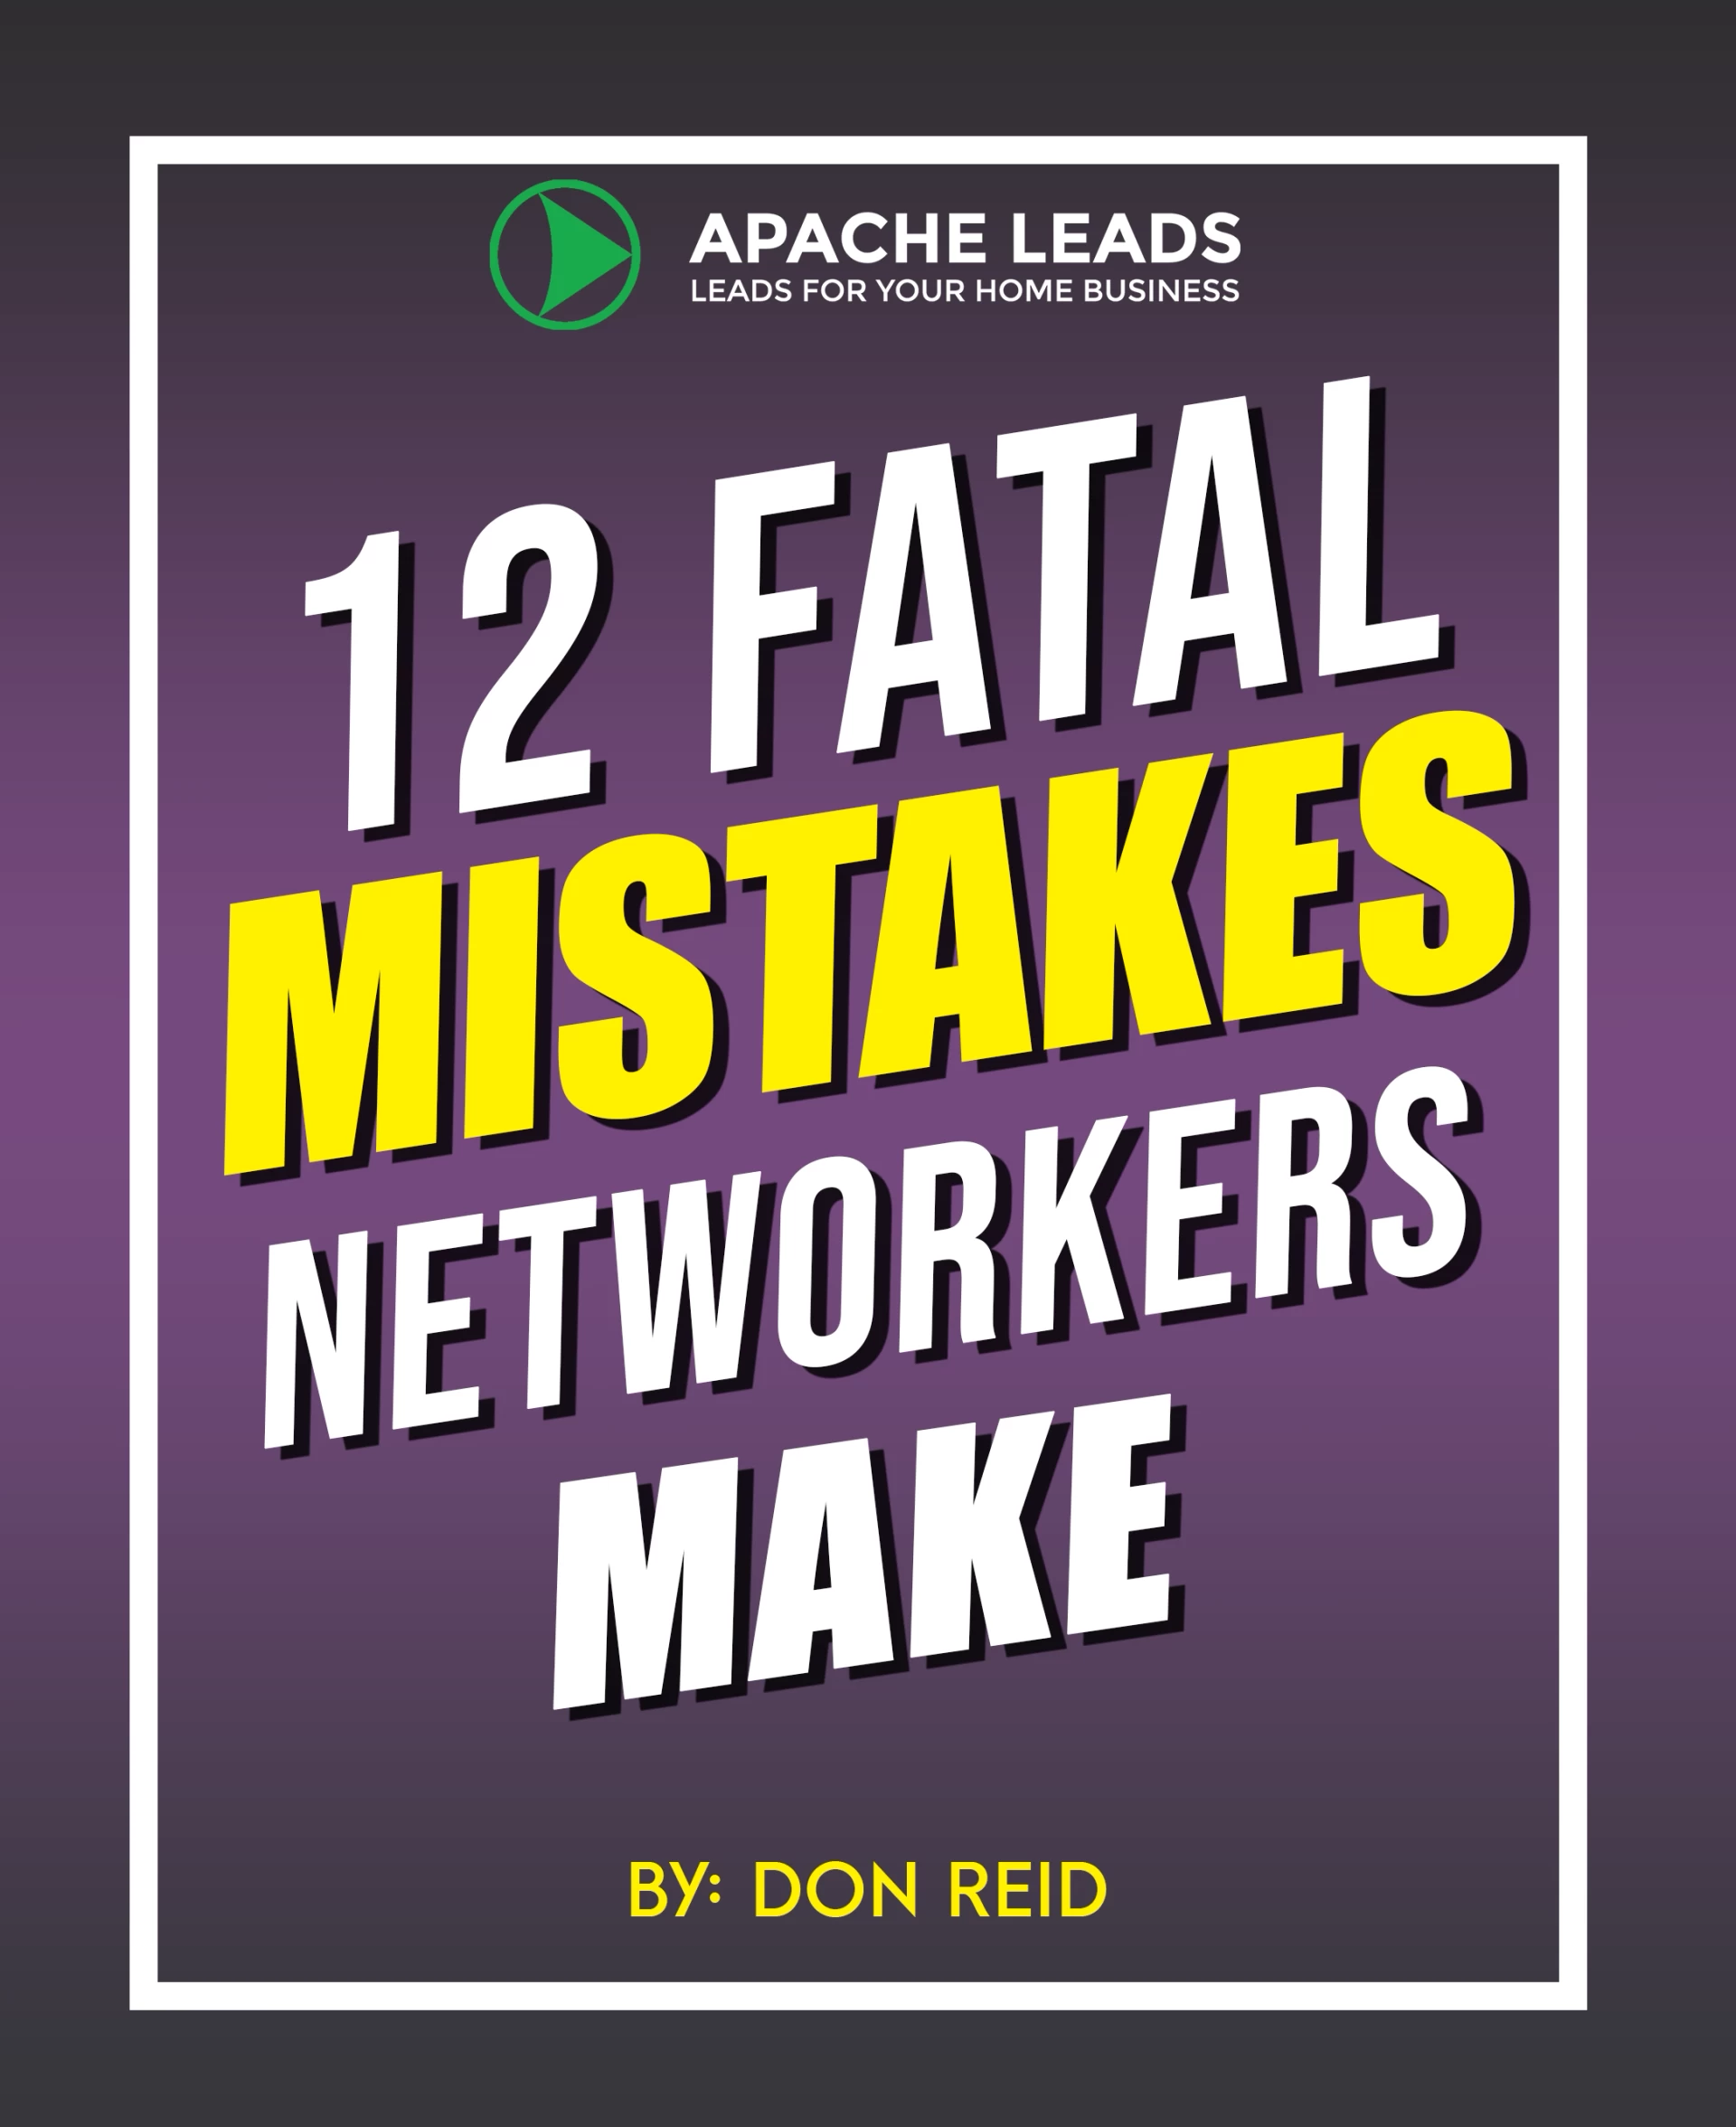 12 Fatal Mistakes Networkers Make